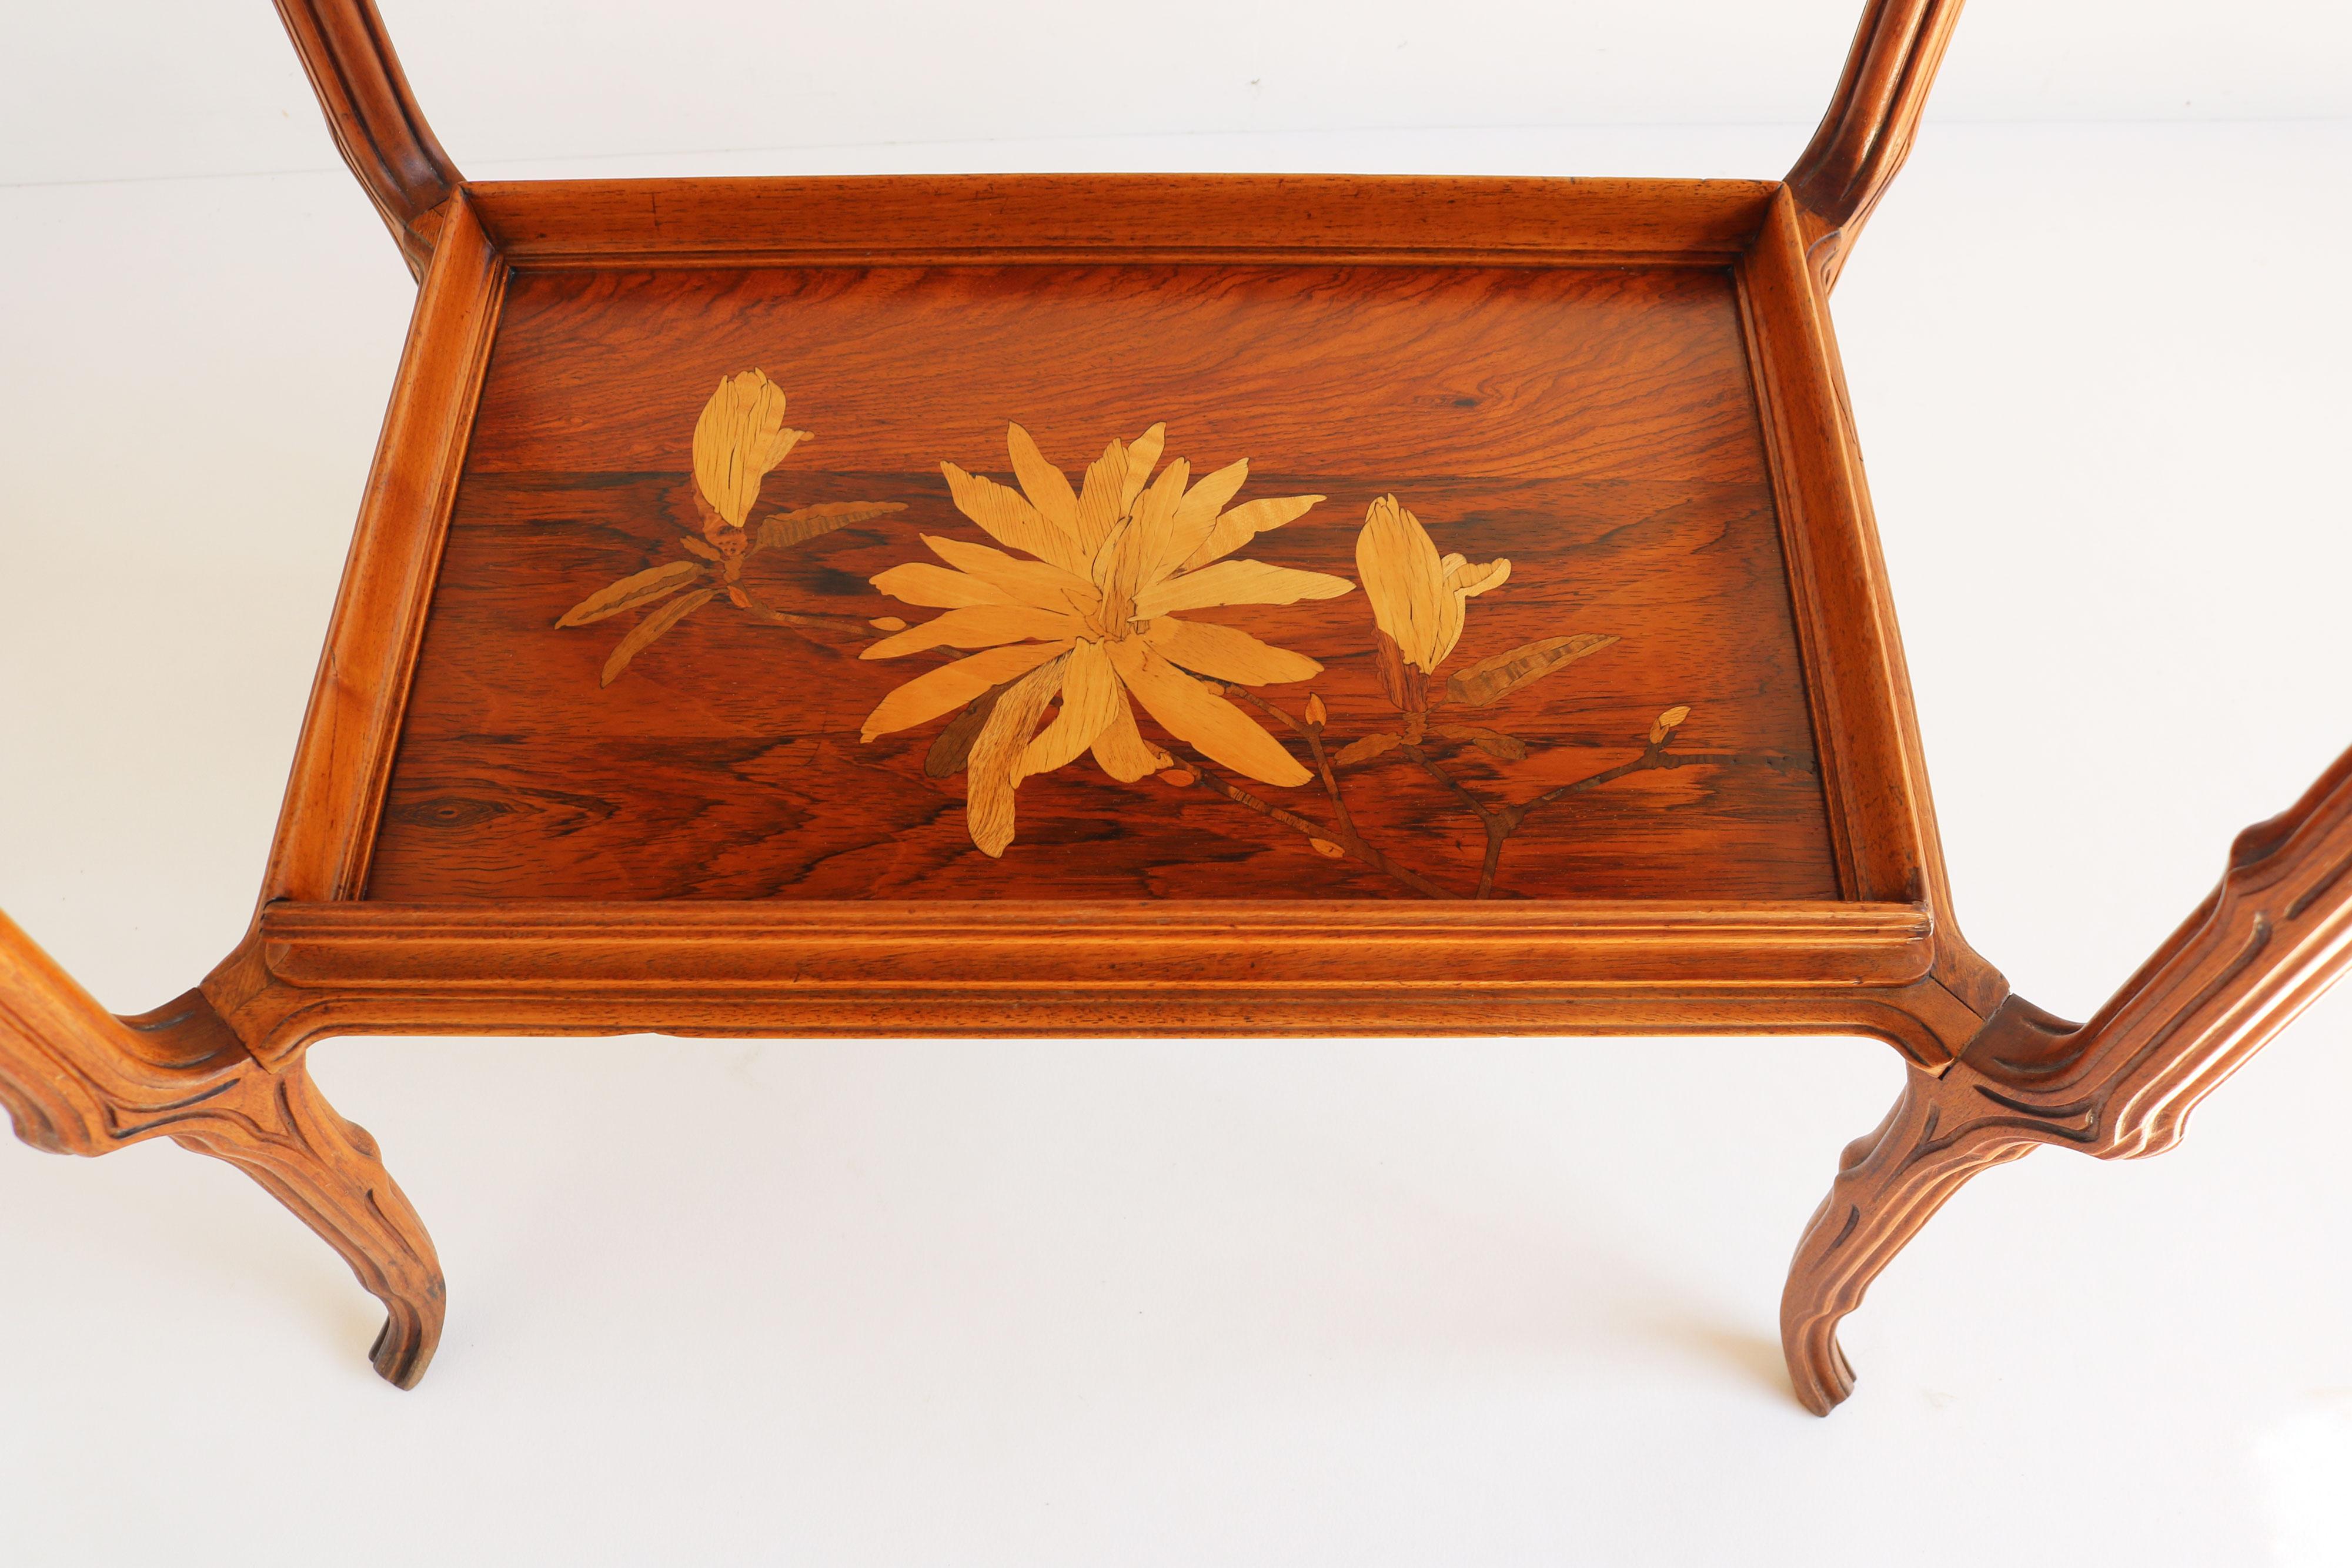 Early 20th Century Original French Art Nouveau Marquetry Table ''Japonisme'' by Emile Galle 1900 For Sale